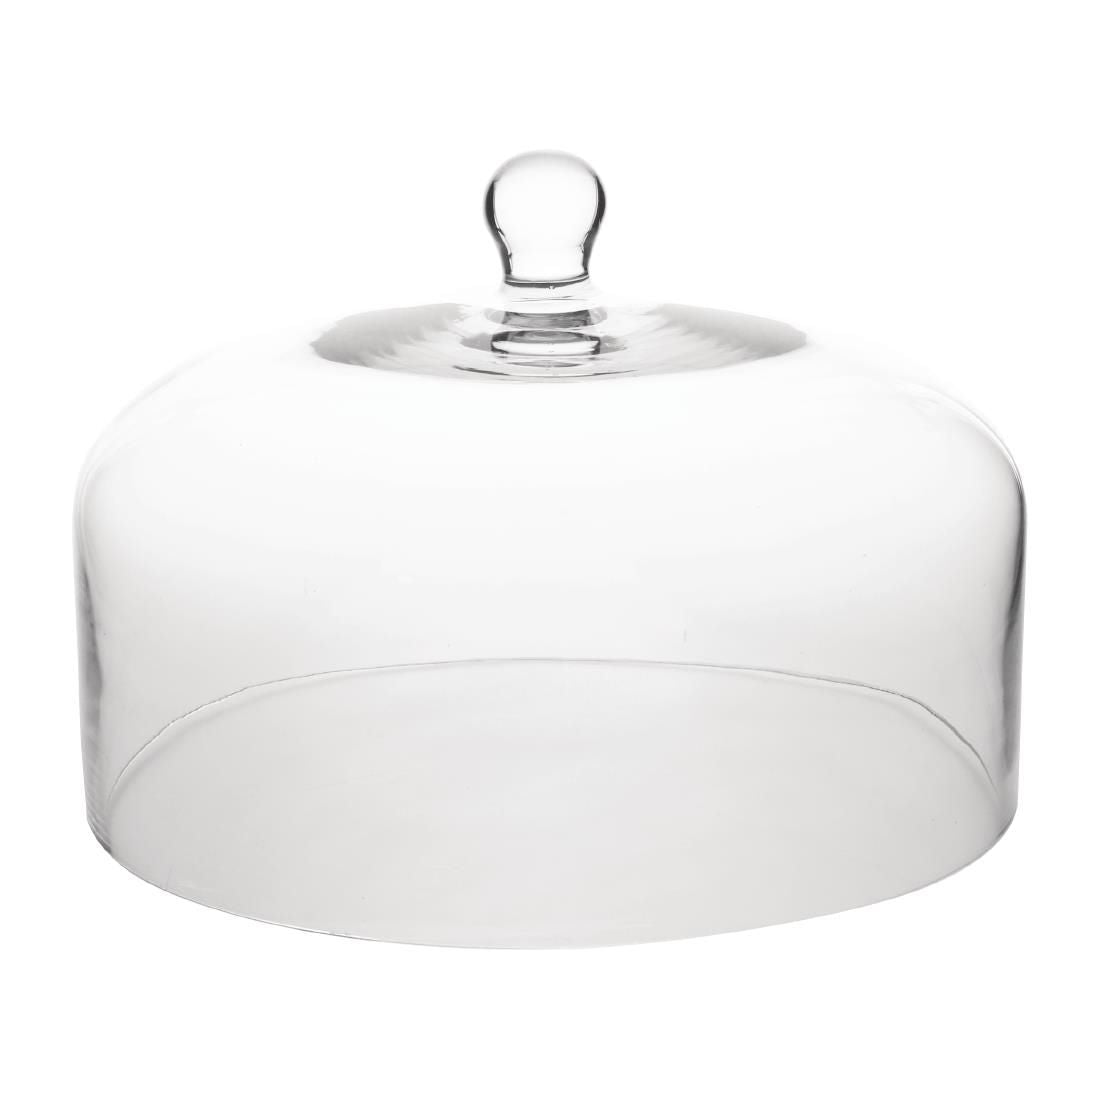 CS014 Olympia Glass Cake Stand Dome JD Catering Equipment Solutions Ltd